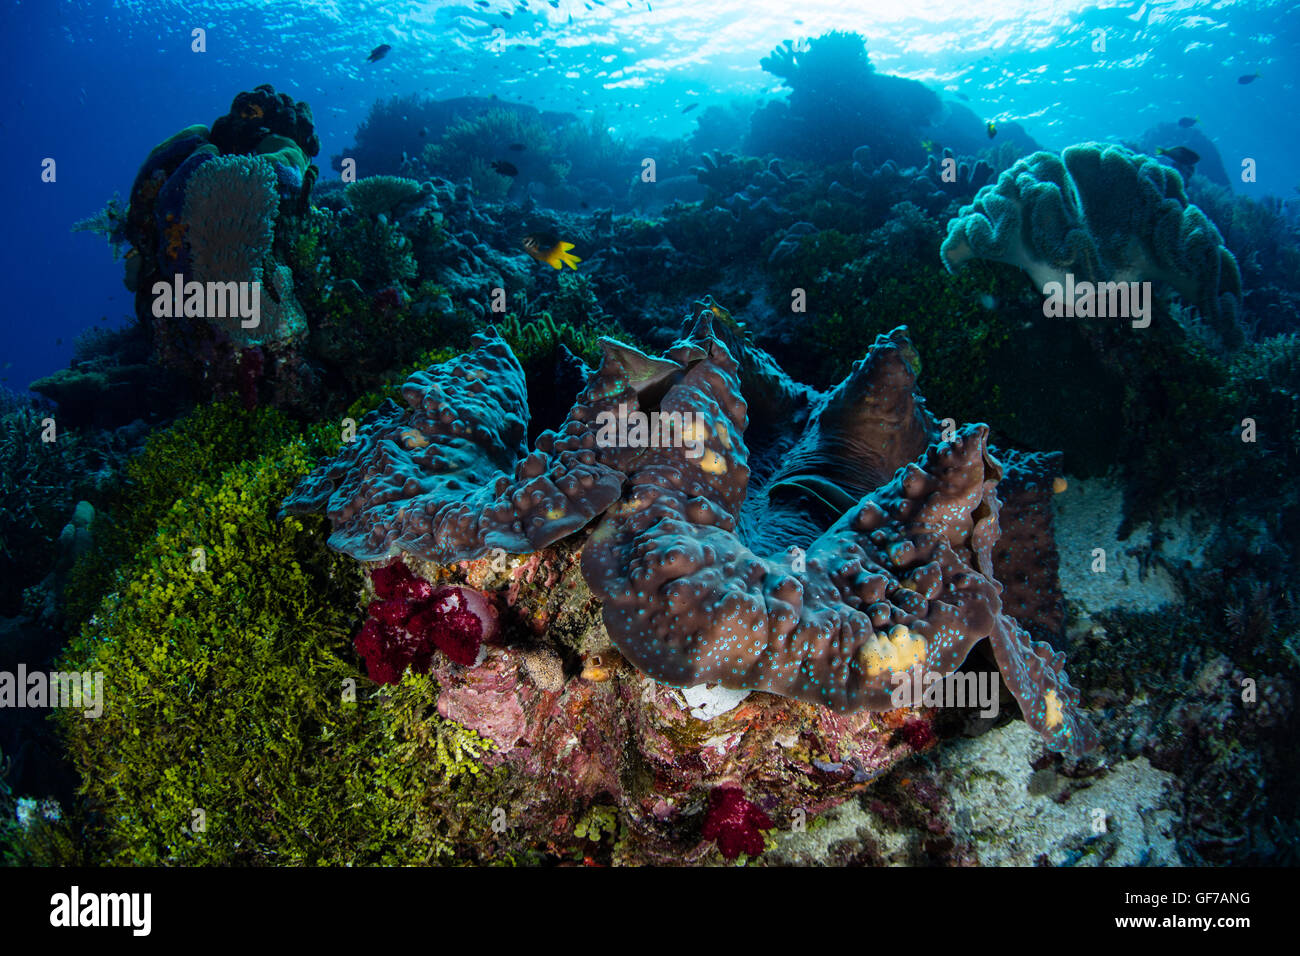 A Giant clam (Tridacna gigas) grows on a coral reef in Raja Ampat, Indonesia. This massive bivalve is an endangered species. Stock Photo